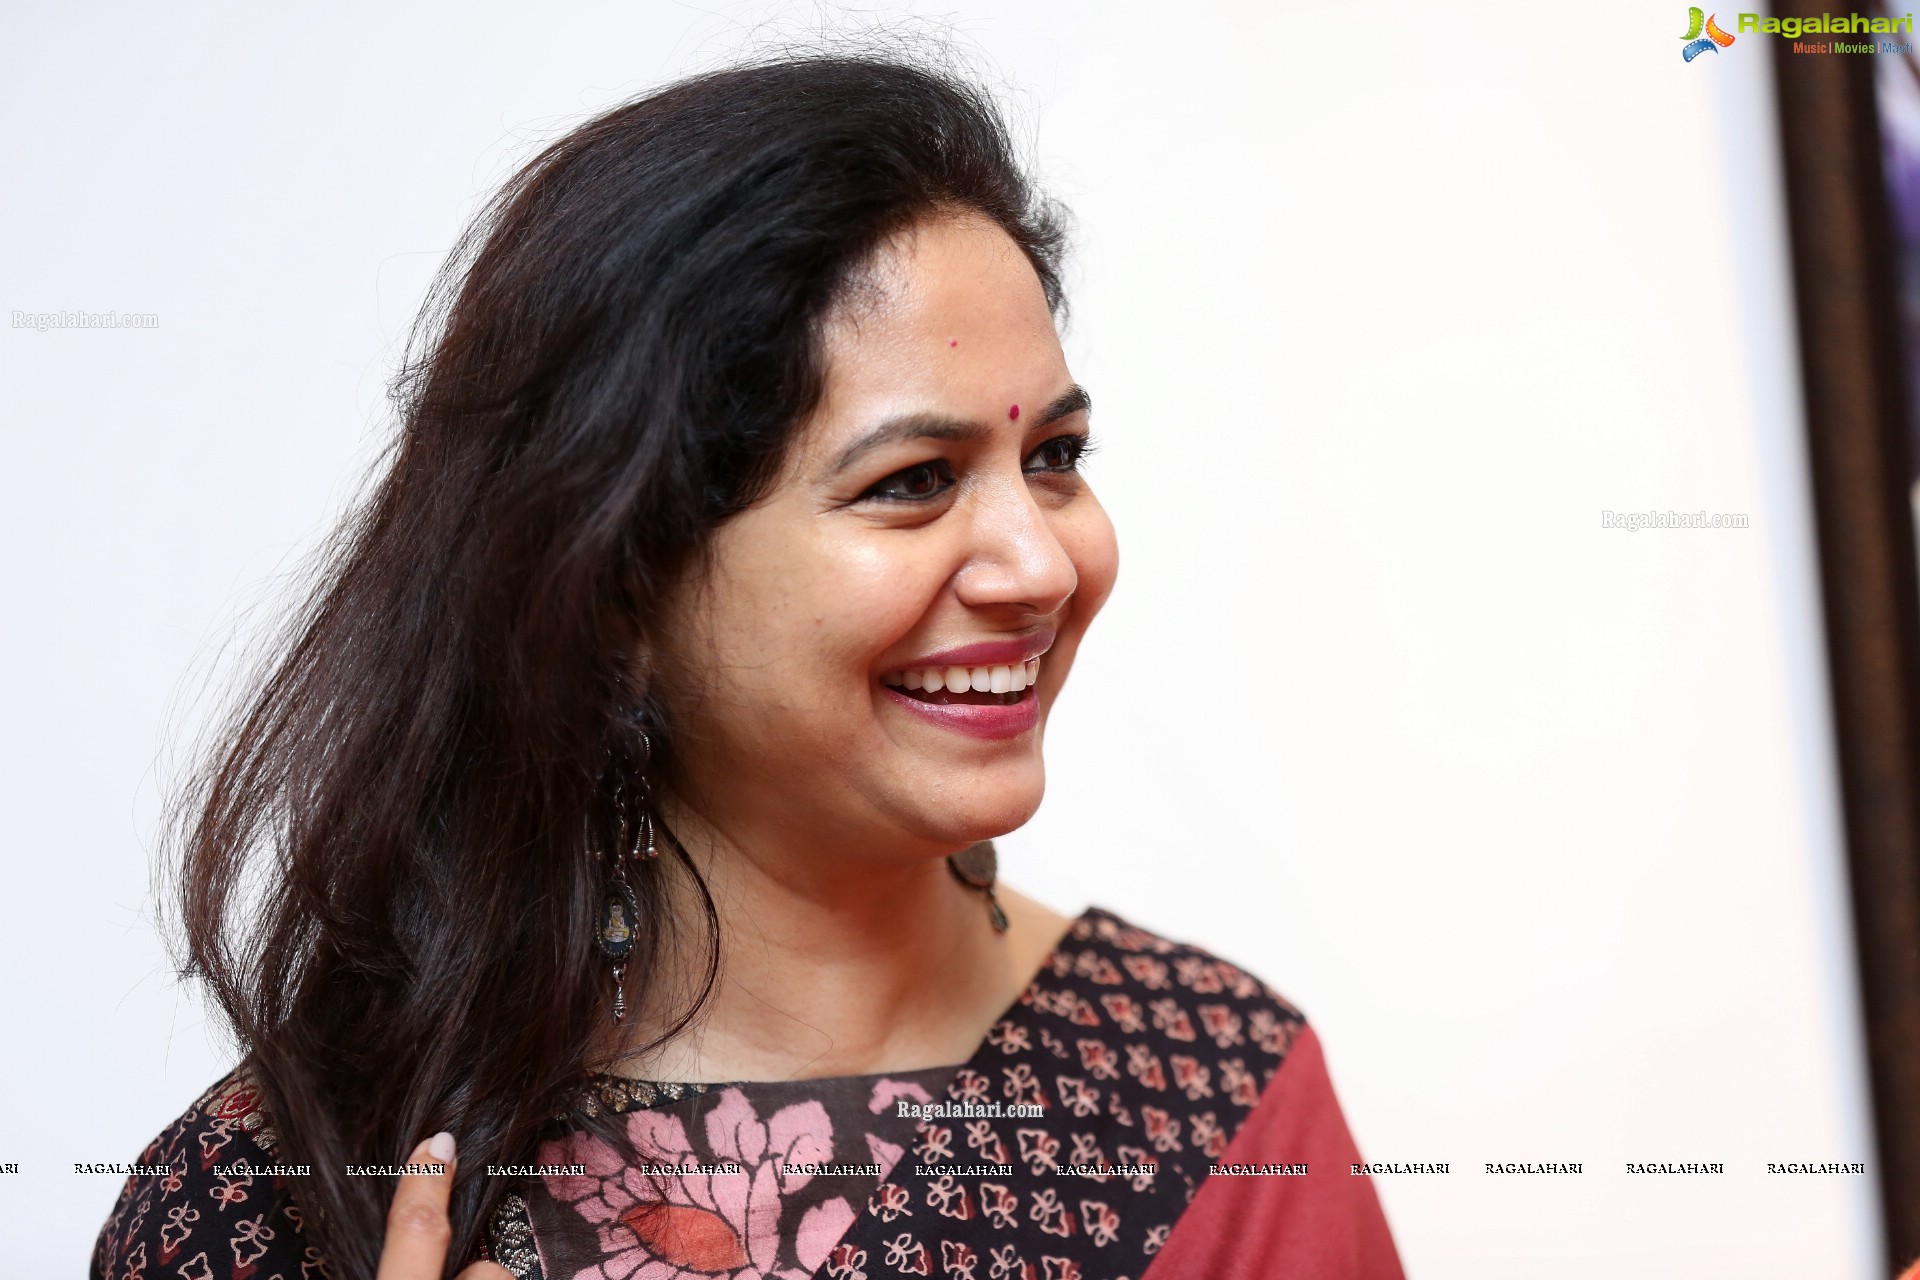 Sunitha at Reminiscences - Kashmir on Canvas Art Exhibition for a Cause - HD Gallery